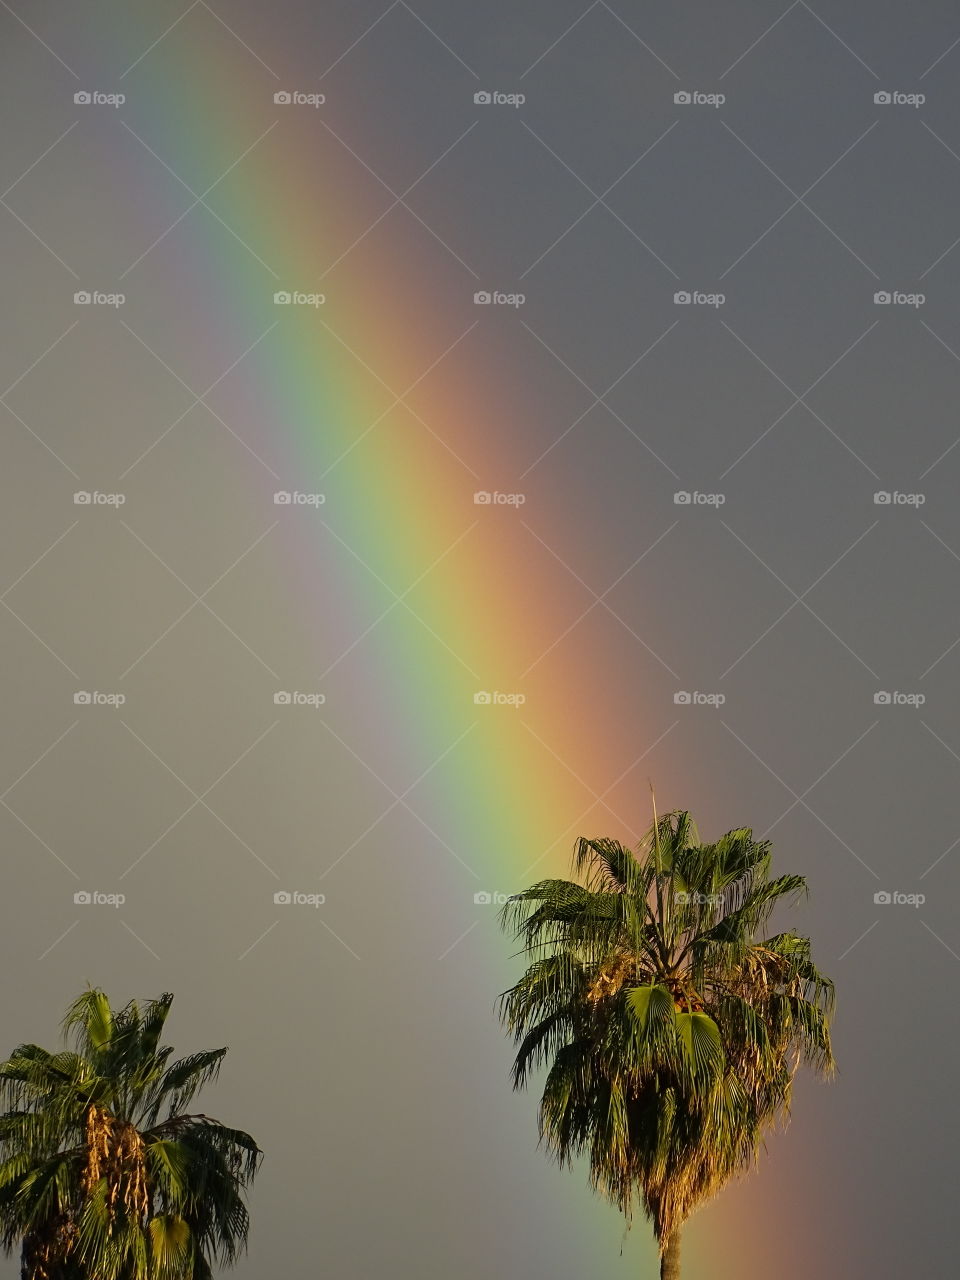 View of a rainbow